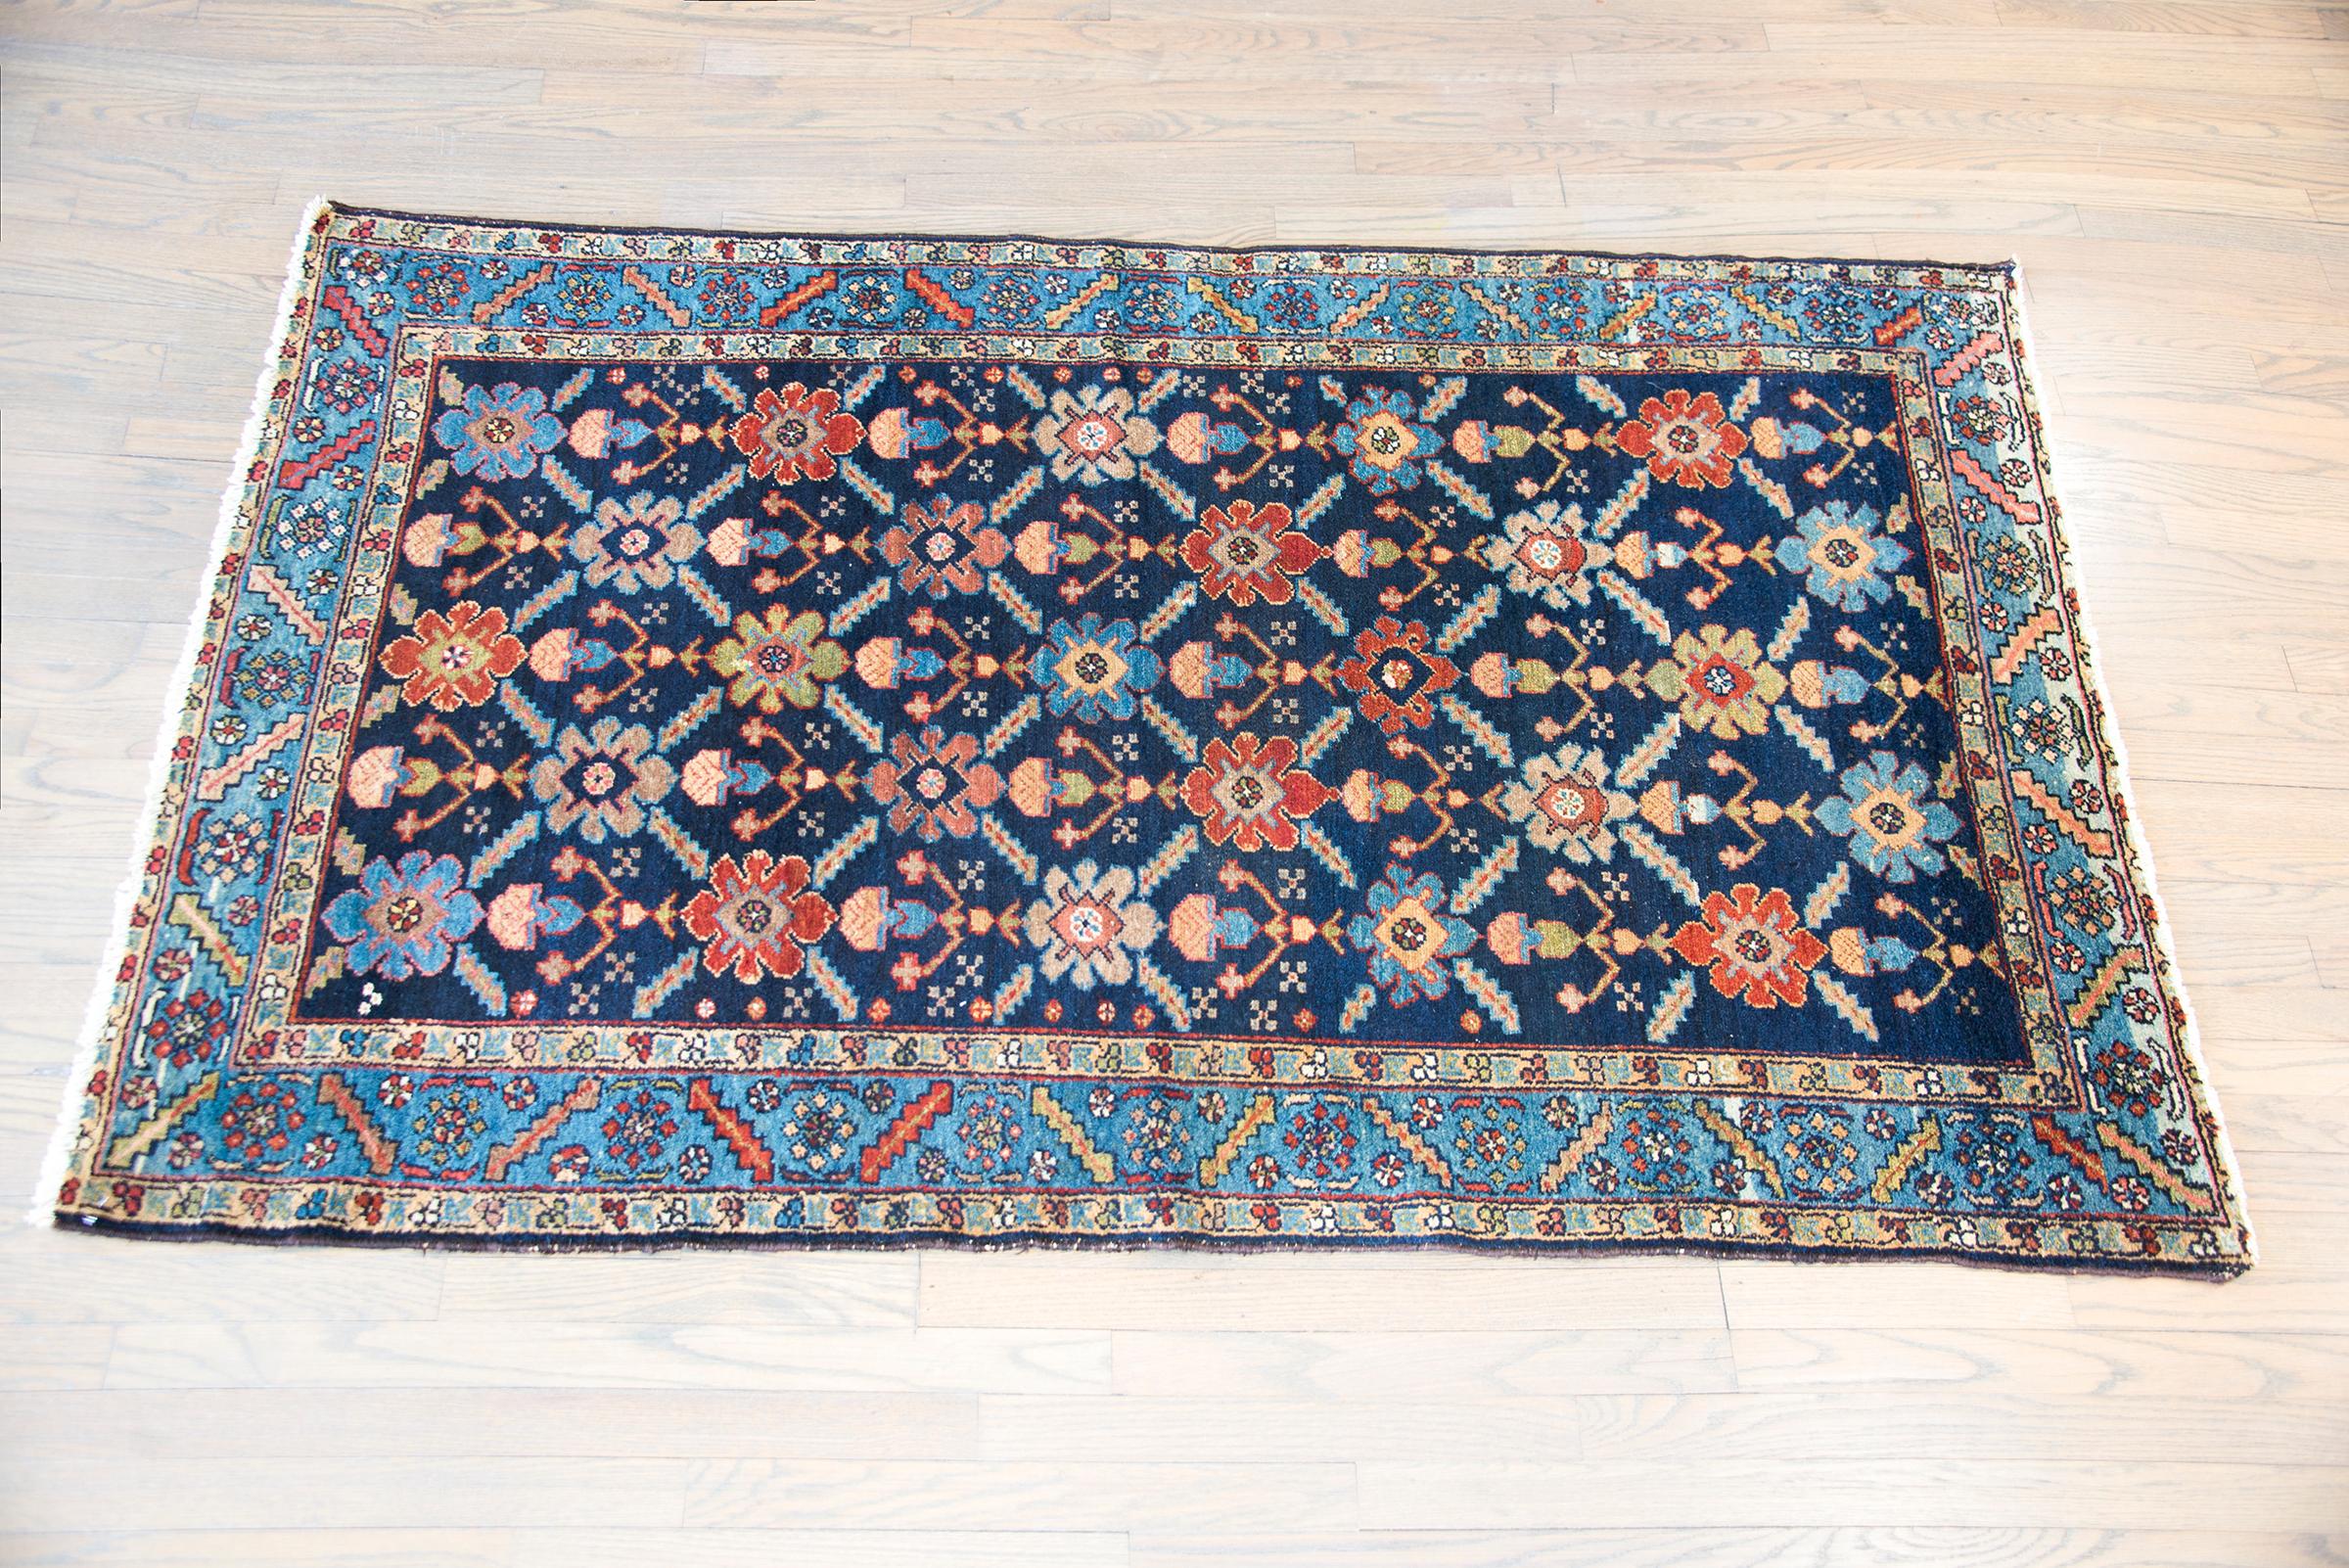 A wonderful early 20th century Persian Bakhtiari rug with a beautiful all-over trellis floral pattern with multi-colored large-scale flowers and leaves set against a dark indigo background, and surrounded by a border with a wide leaf and floral